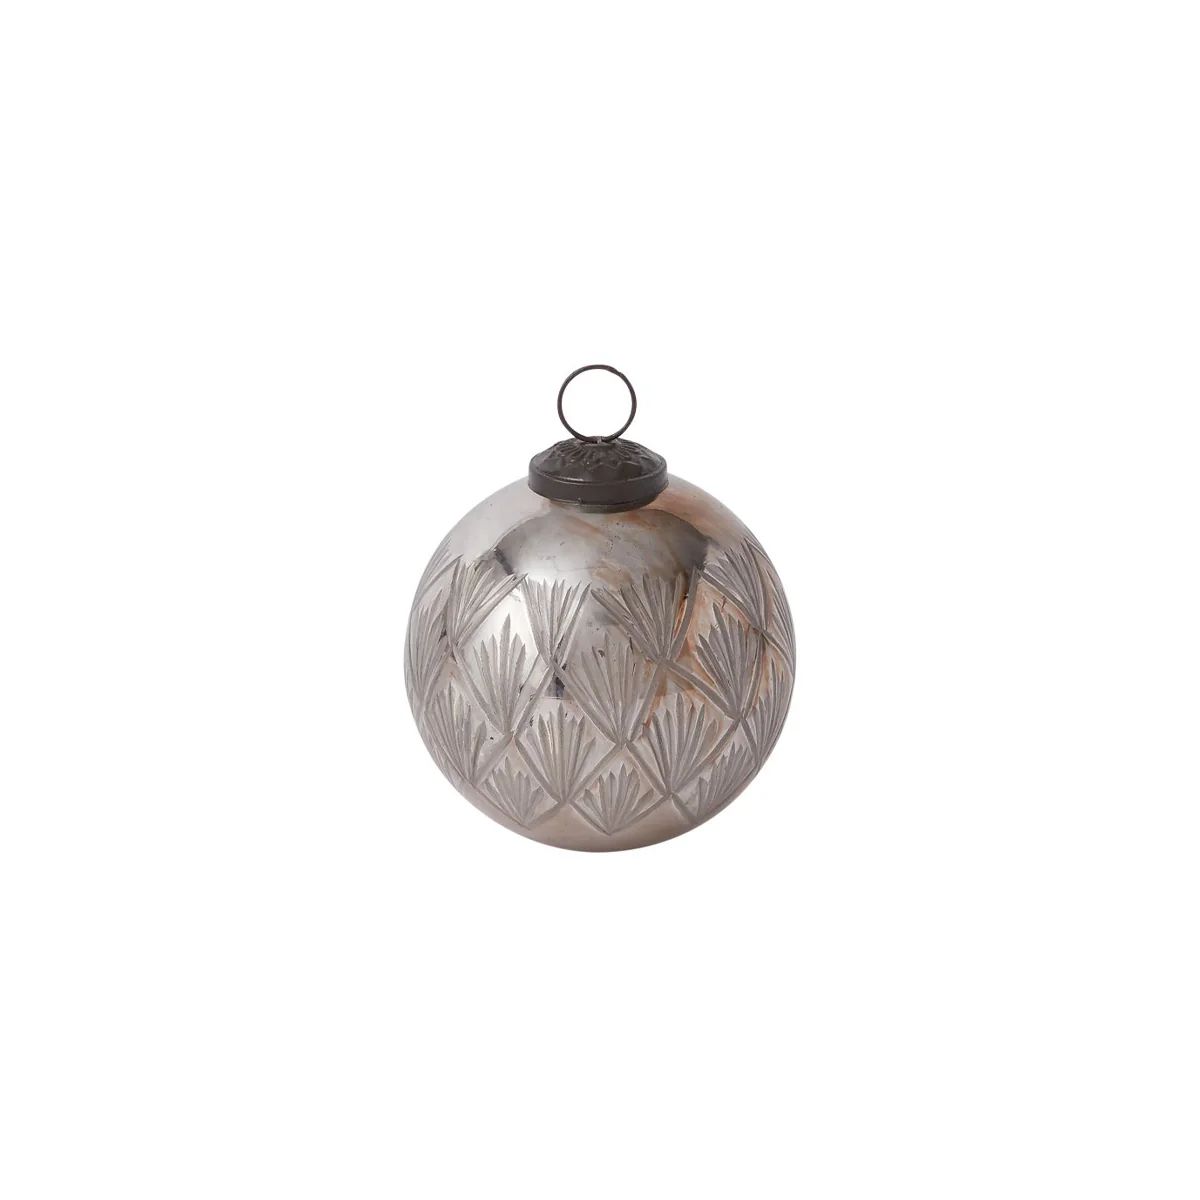 Etched Mercury Ornament | Tuesday Made